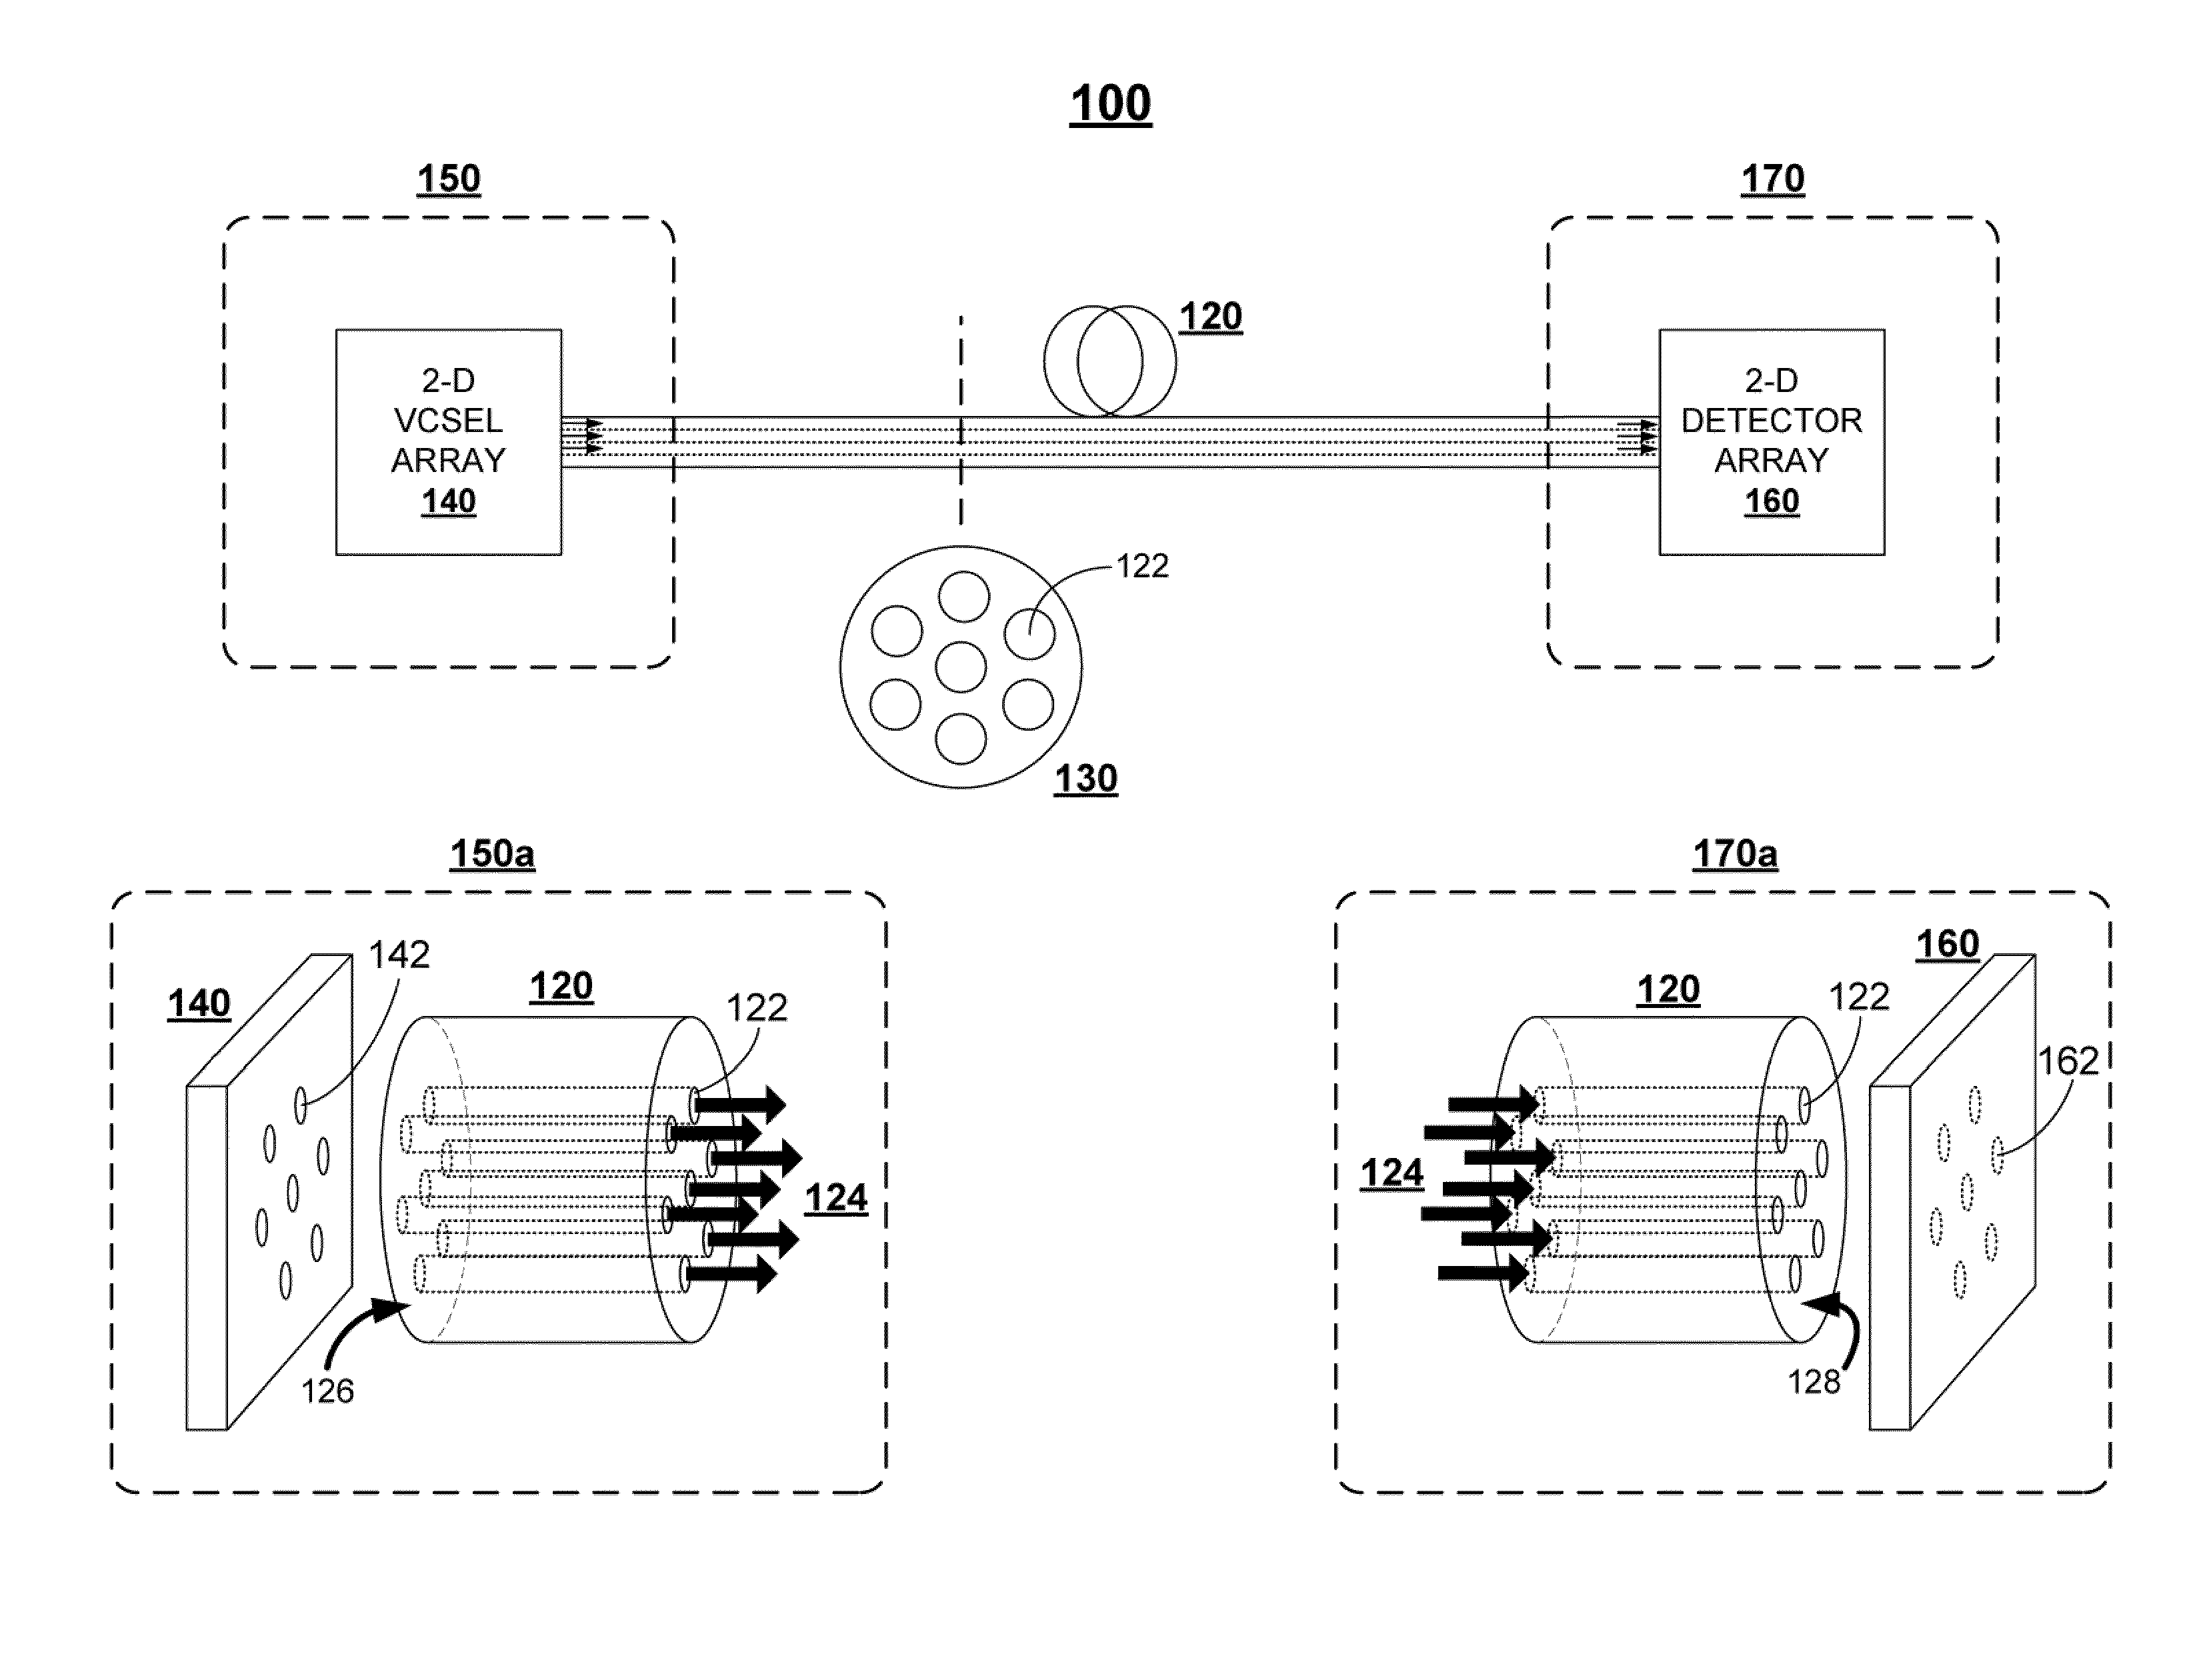 Multicore fiber transmission systems and methods